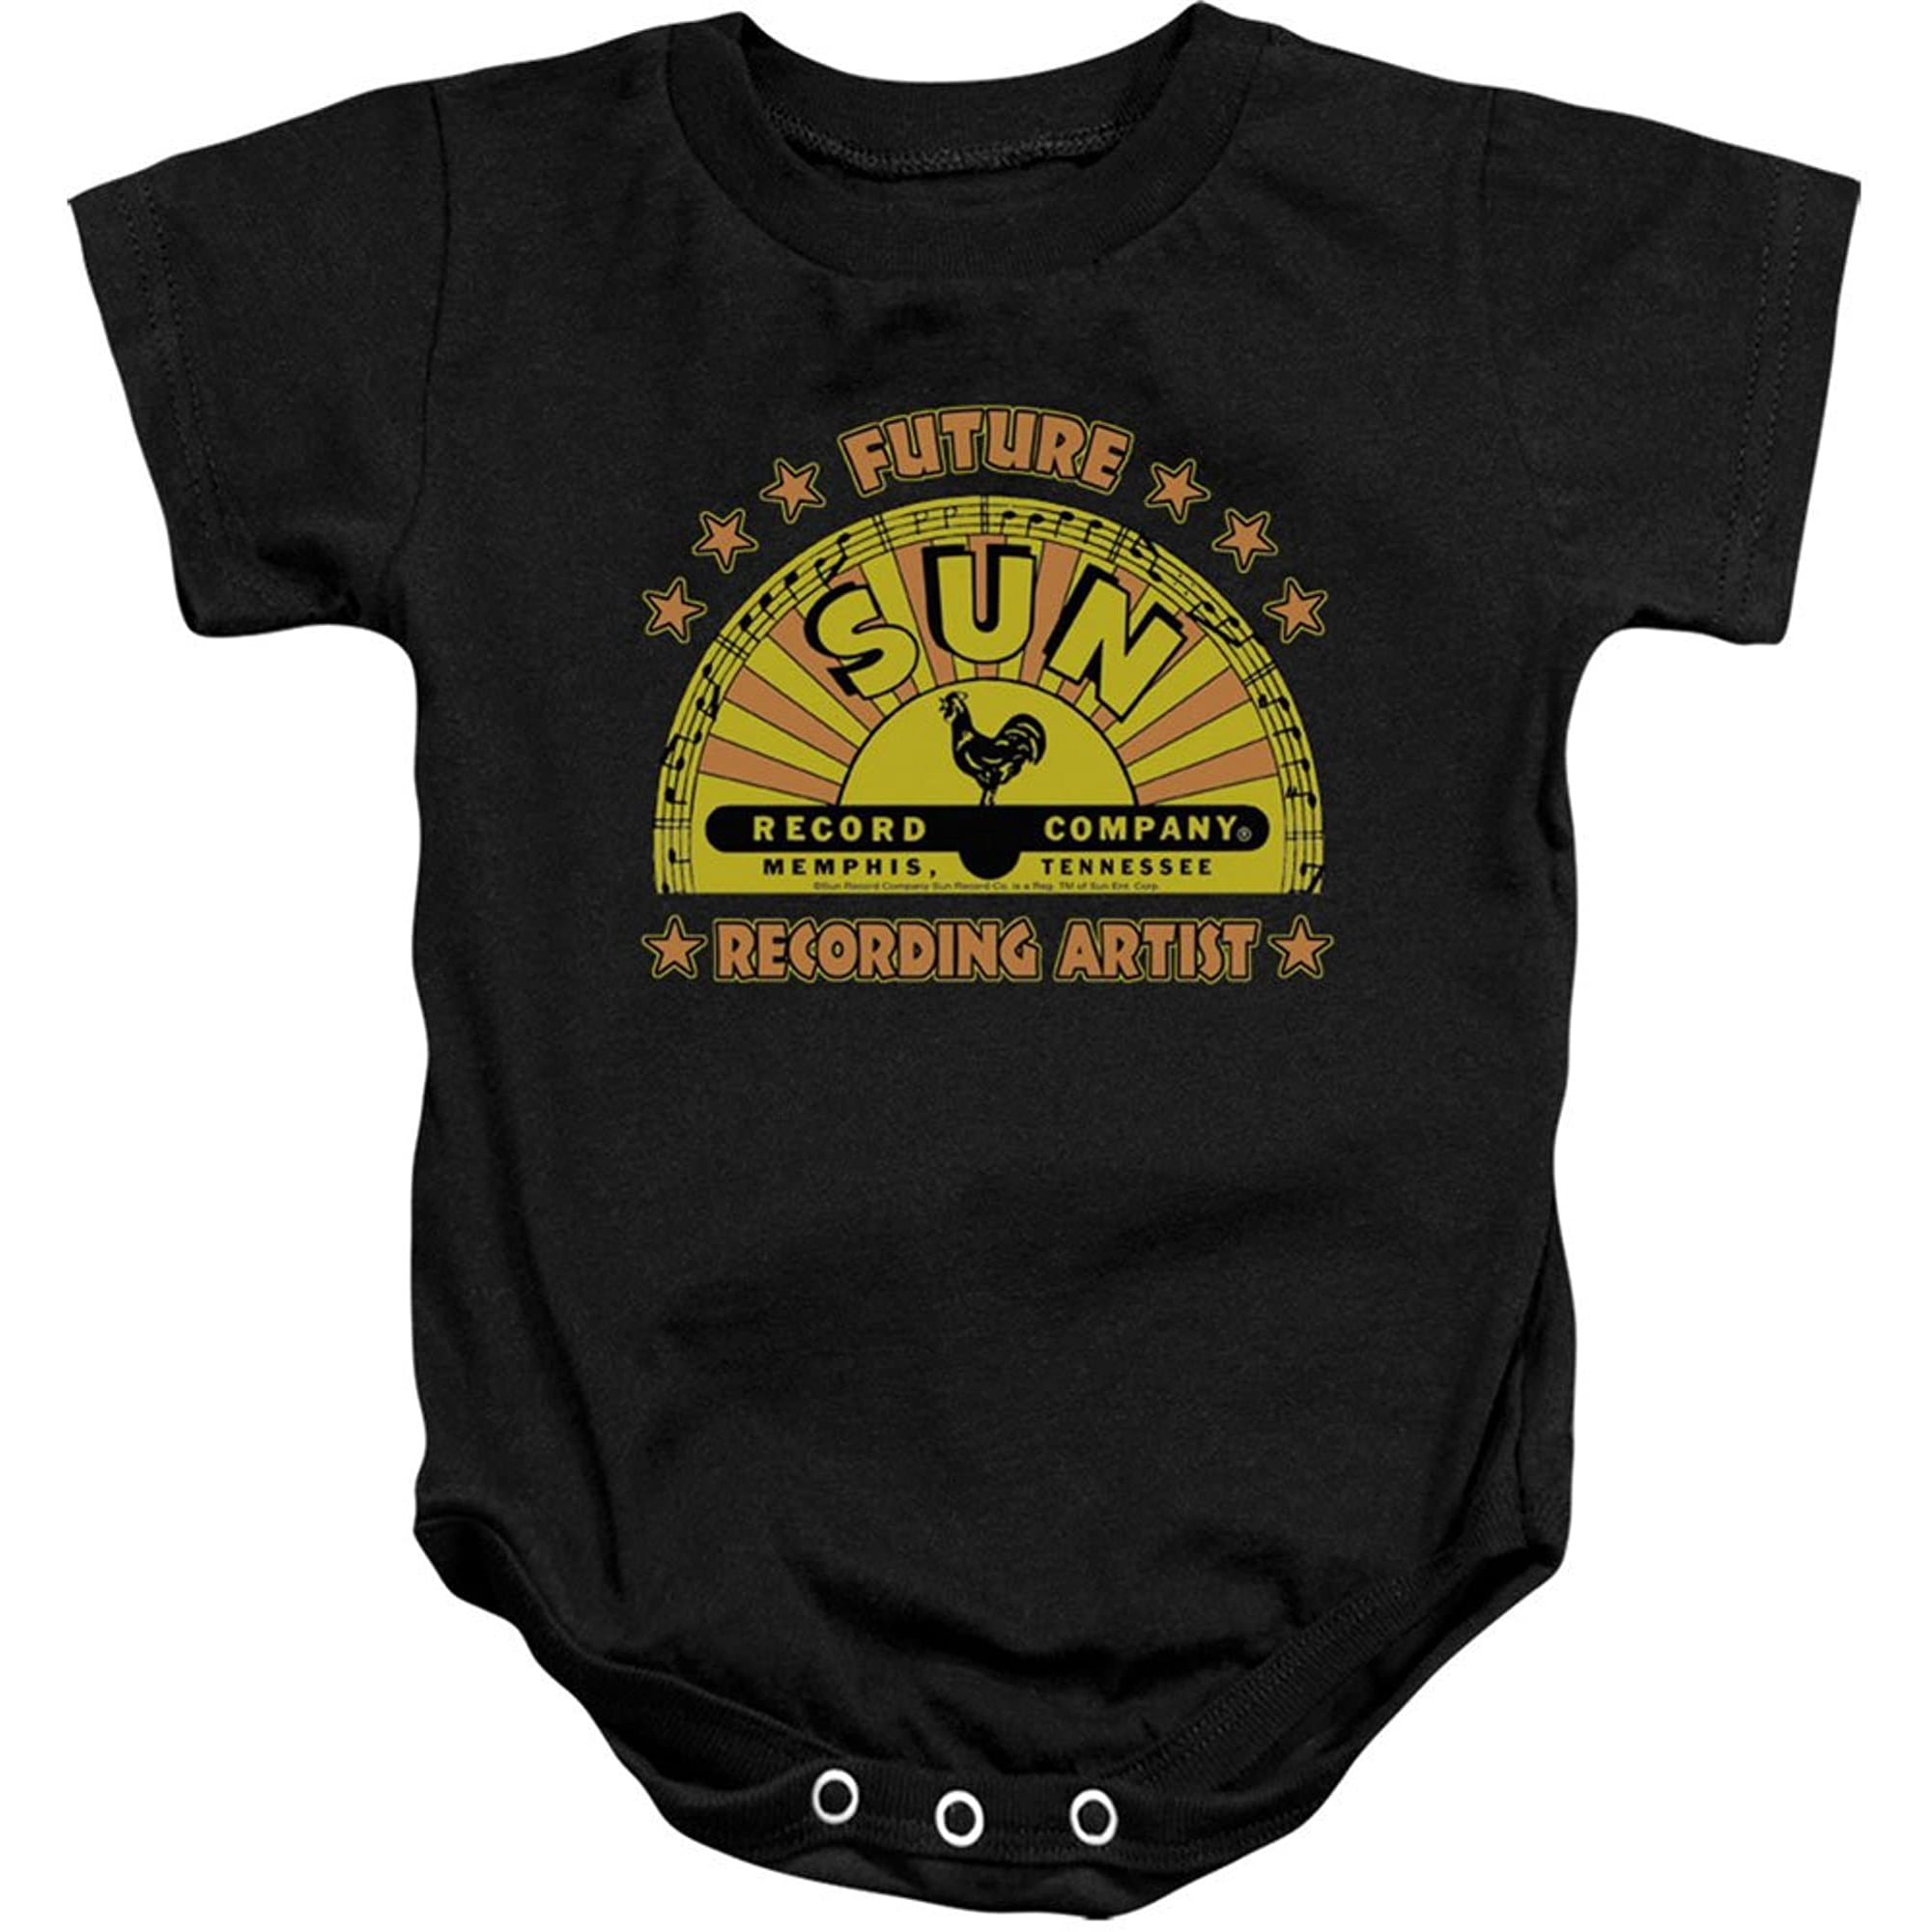 Sun Records Media Company Record Label Worn Logo Baby Infant Romper Snapsuit 